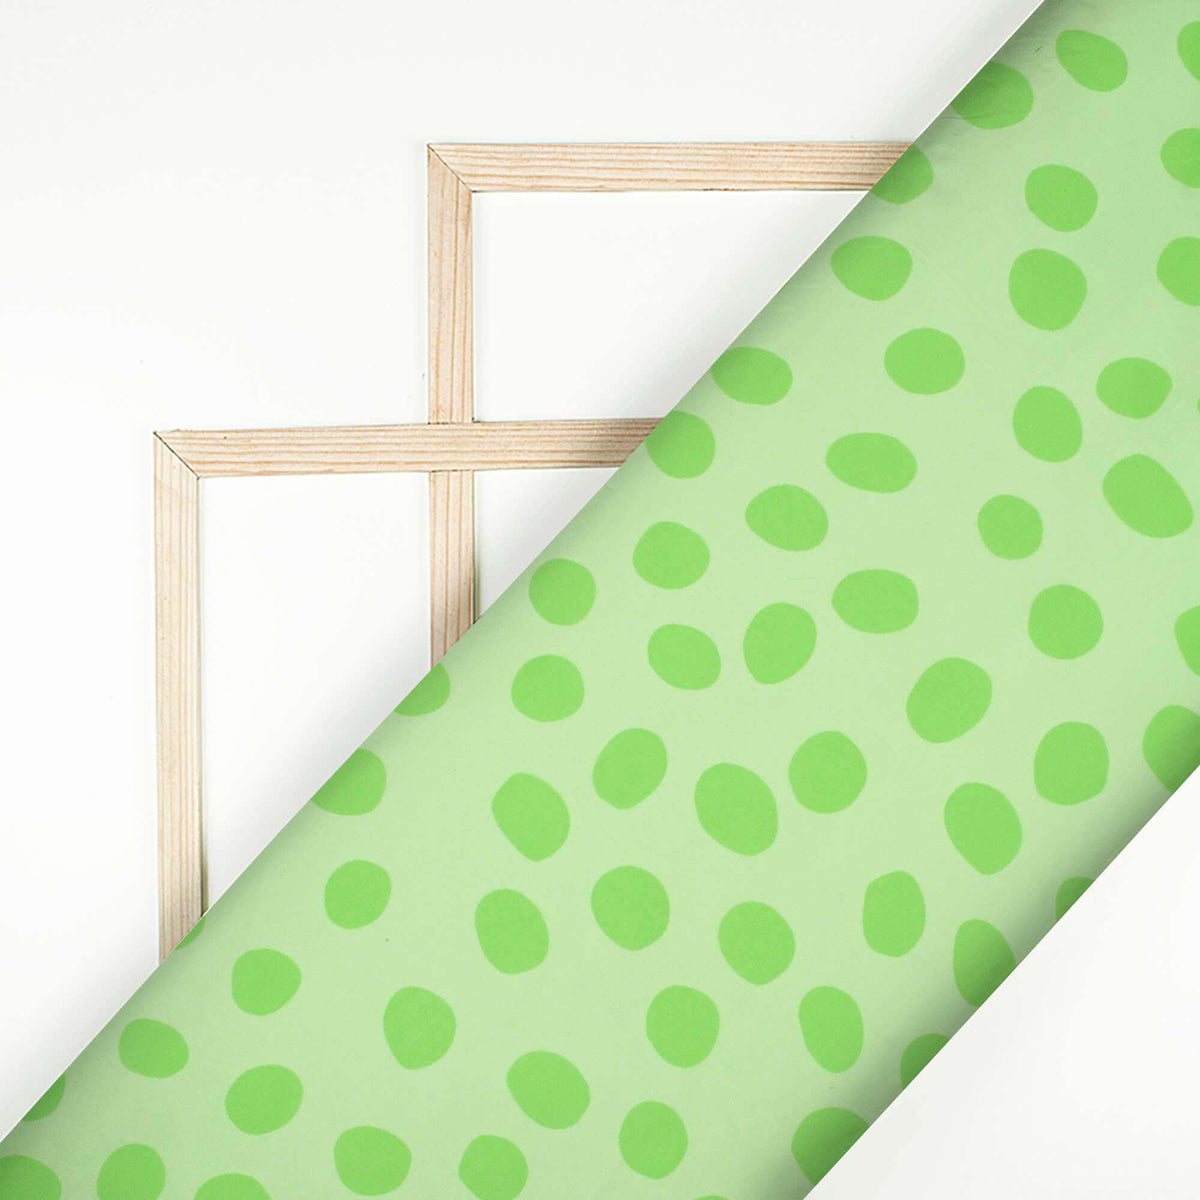 Lime Green Polka Dots Pattern Digital Print Georgette Fabric - Fabcurate